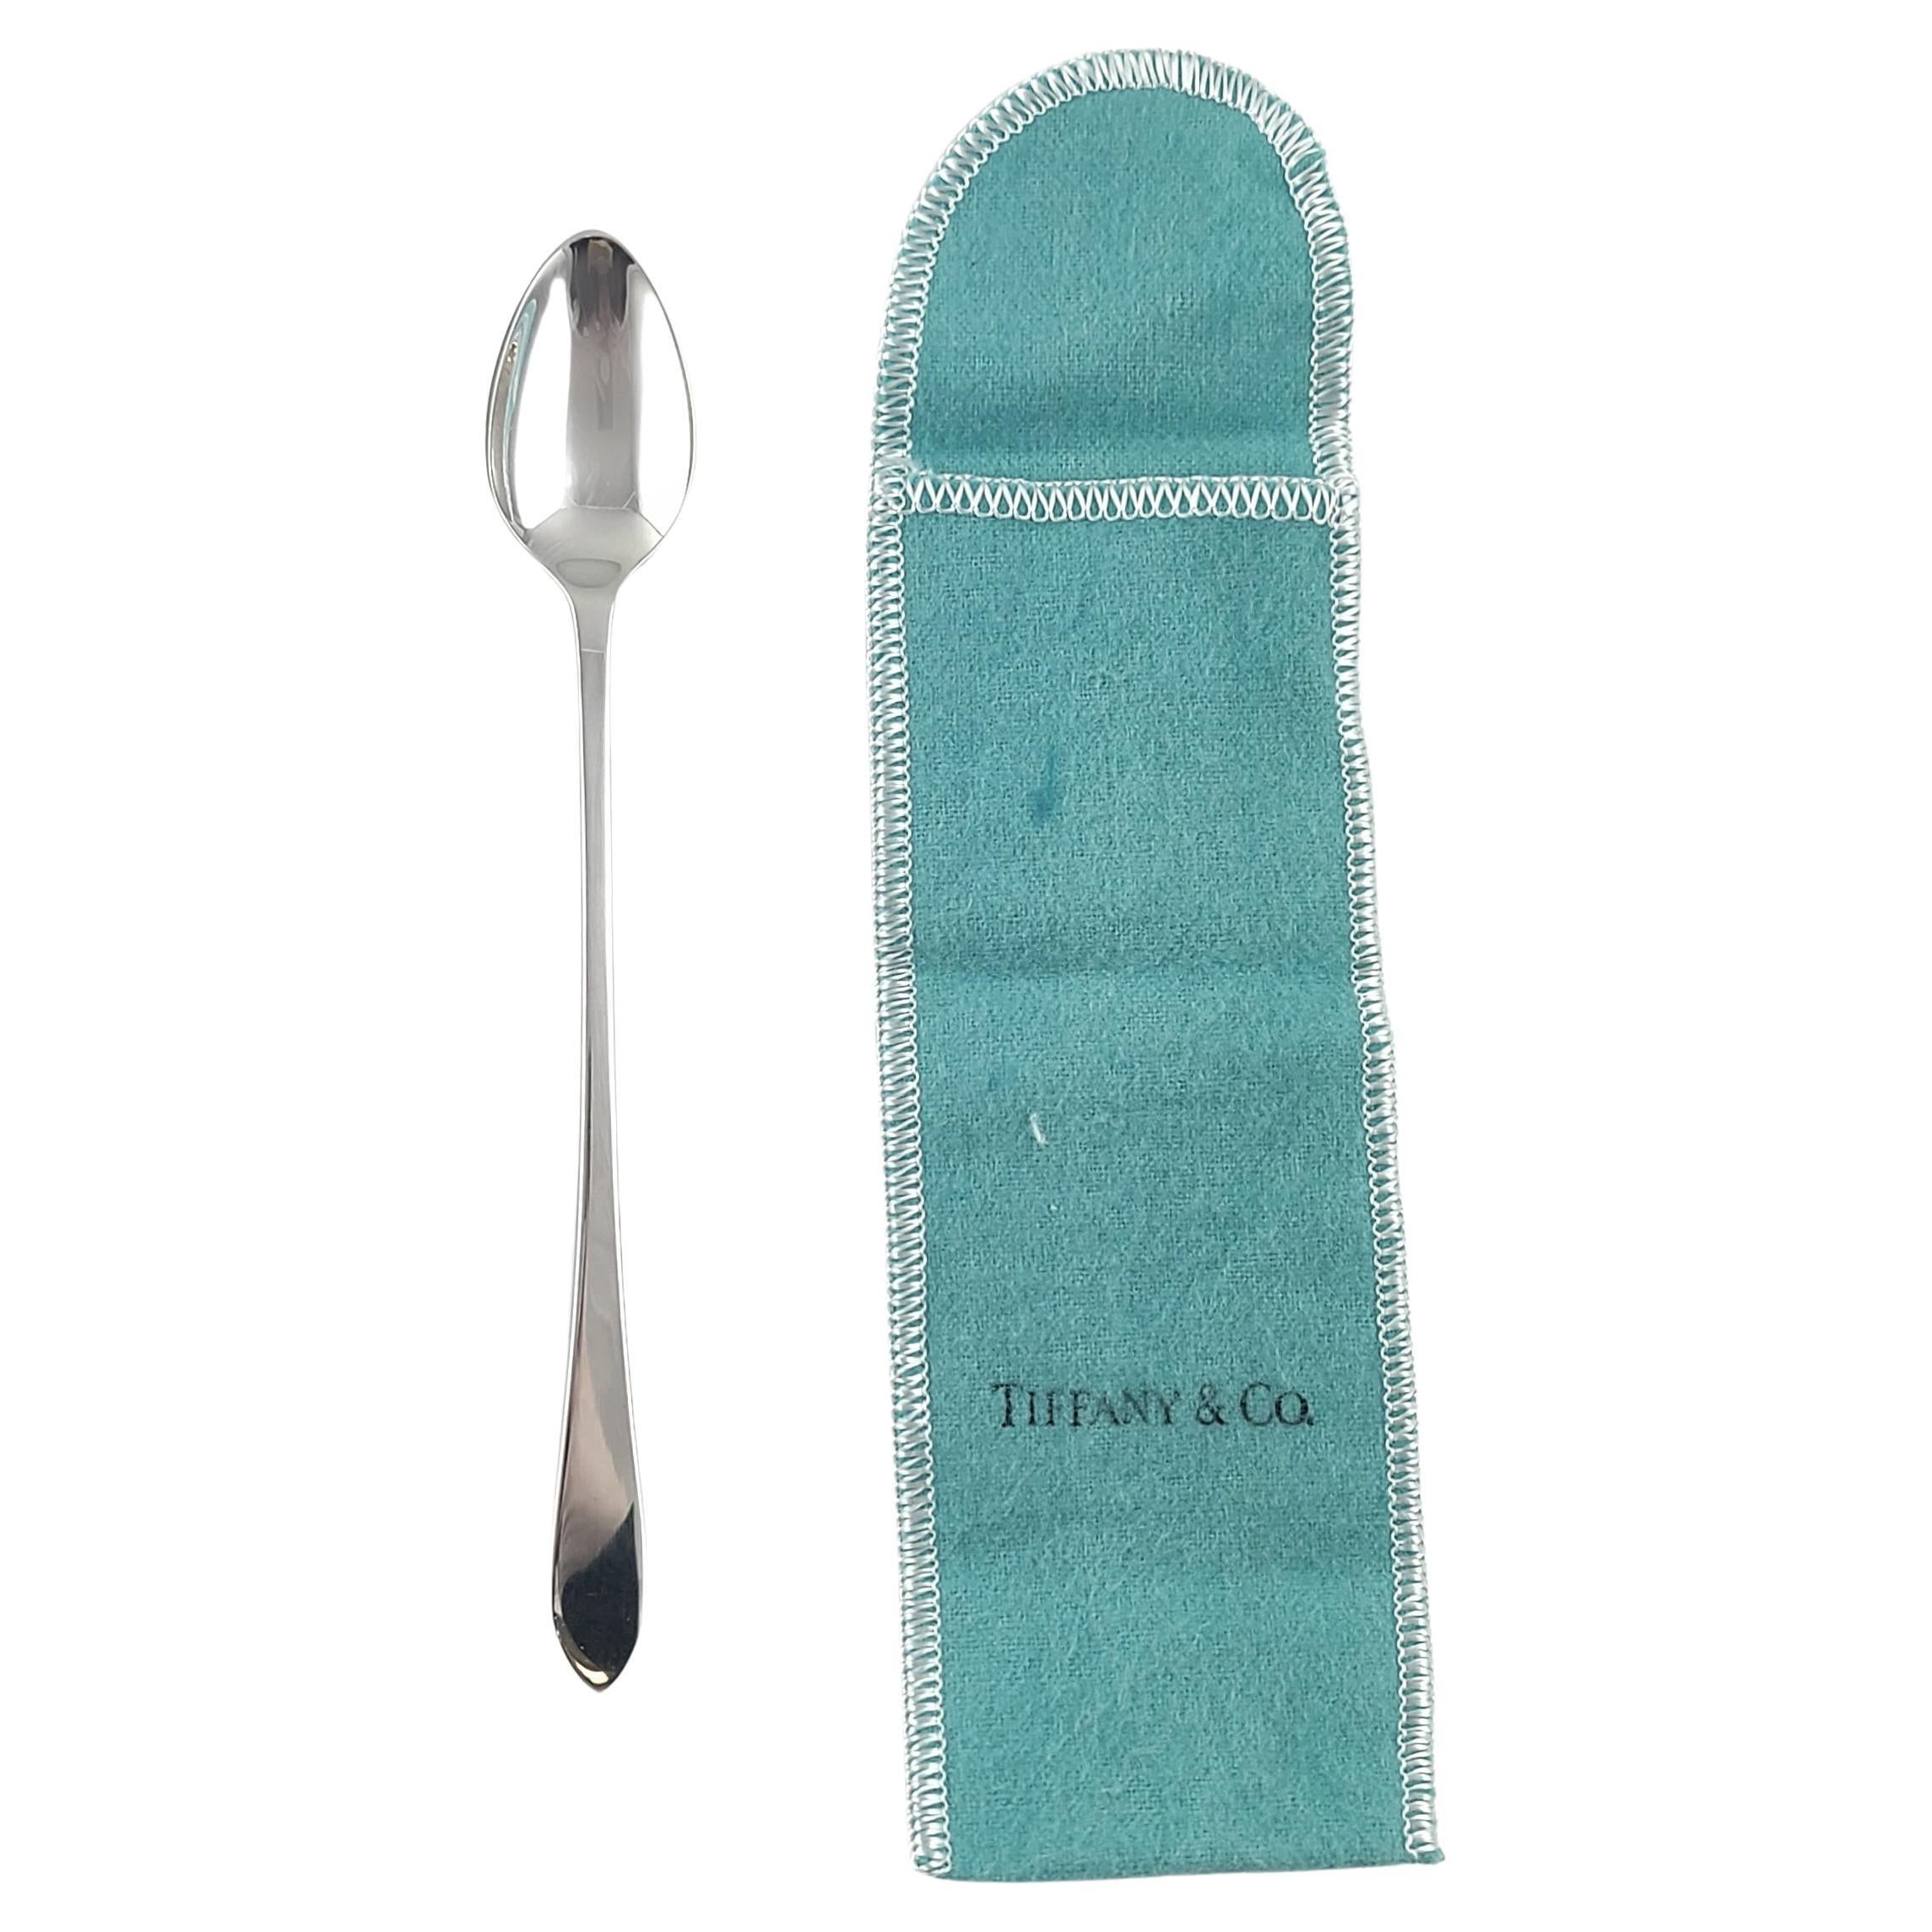 Tiffany & Co Sterling Silver Faneuil Baby Feeding Spoon with Pouch